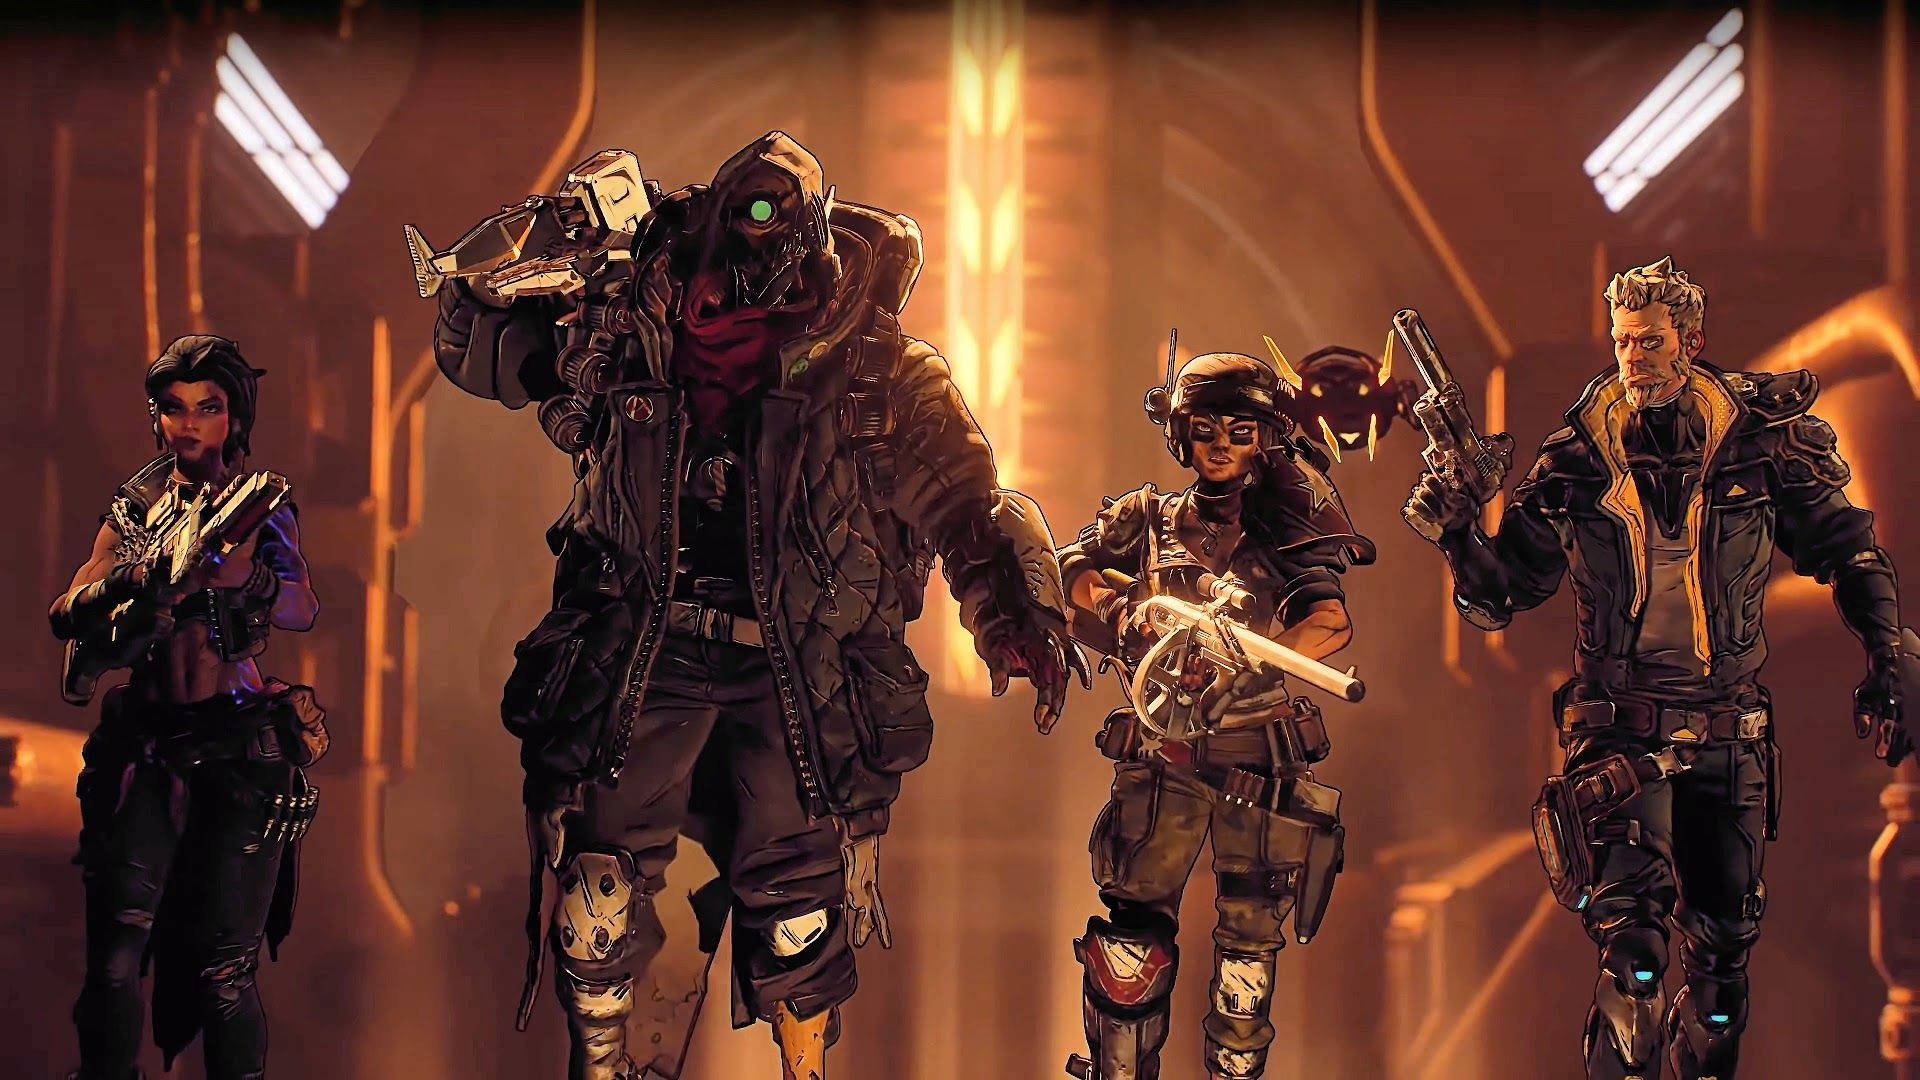 Prepare to blast off on your next mission in Borderlands 3! Wallpaper